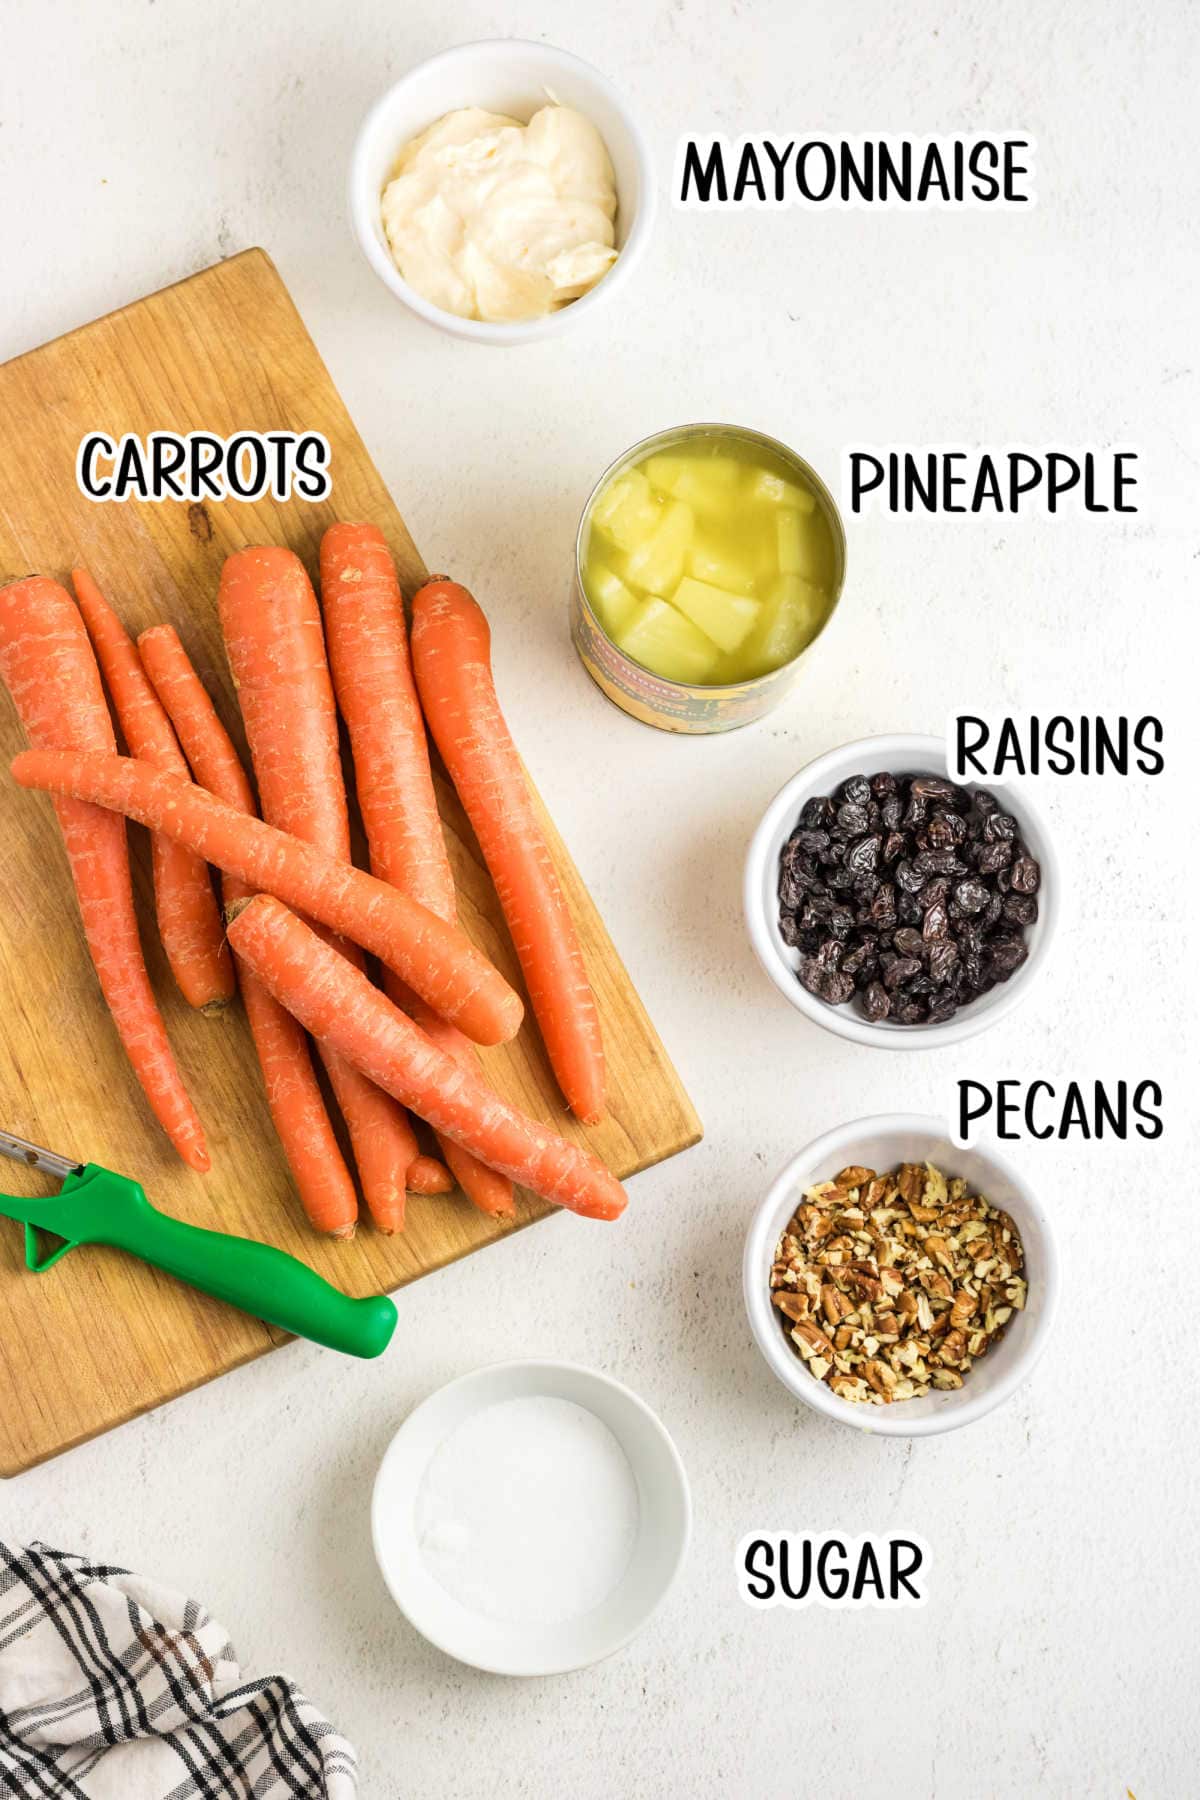 Labeled ingredients for carrot raising salad with pineapple.